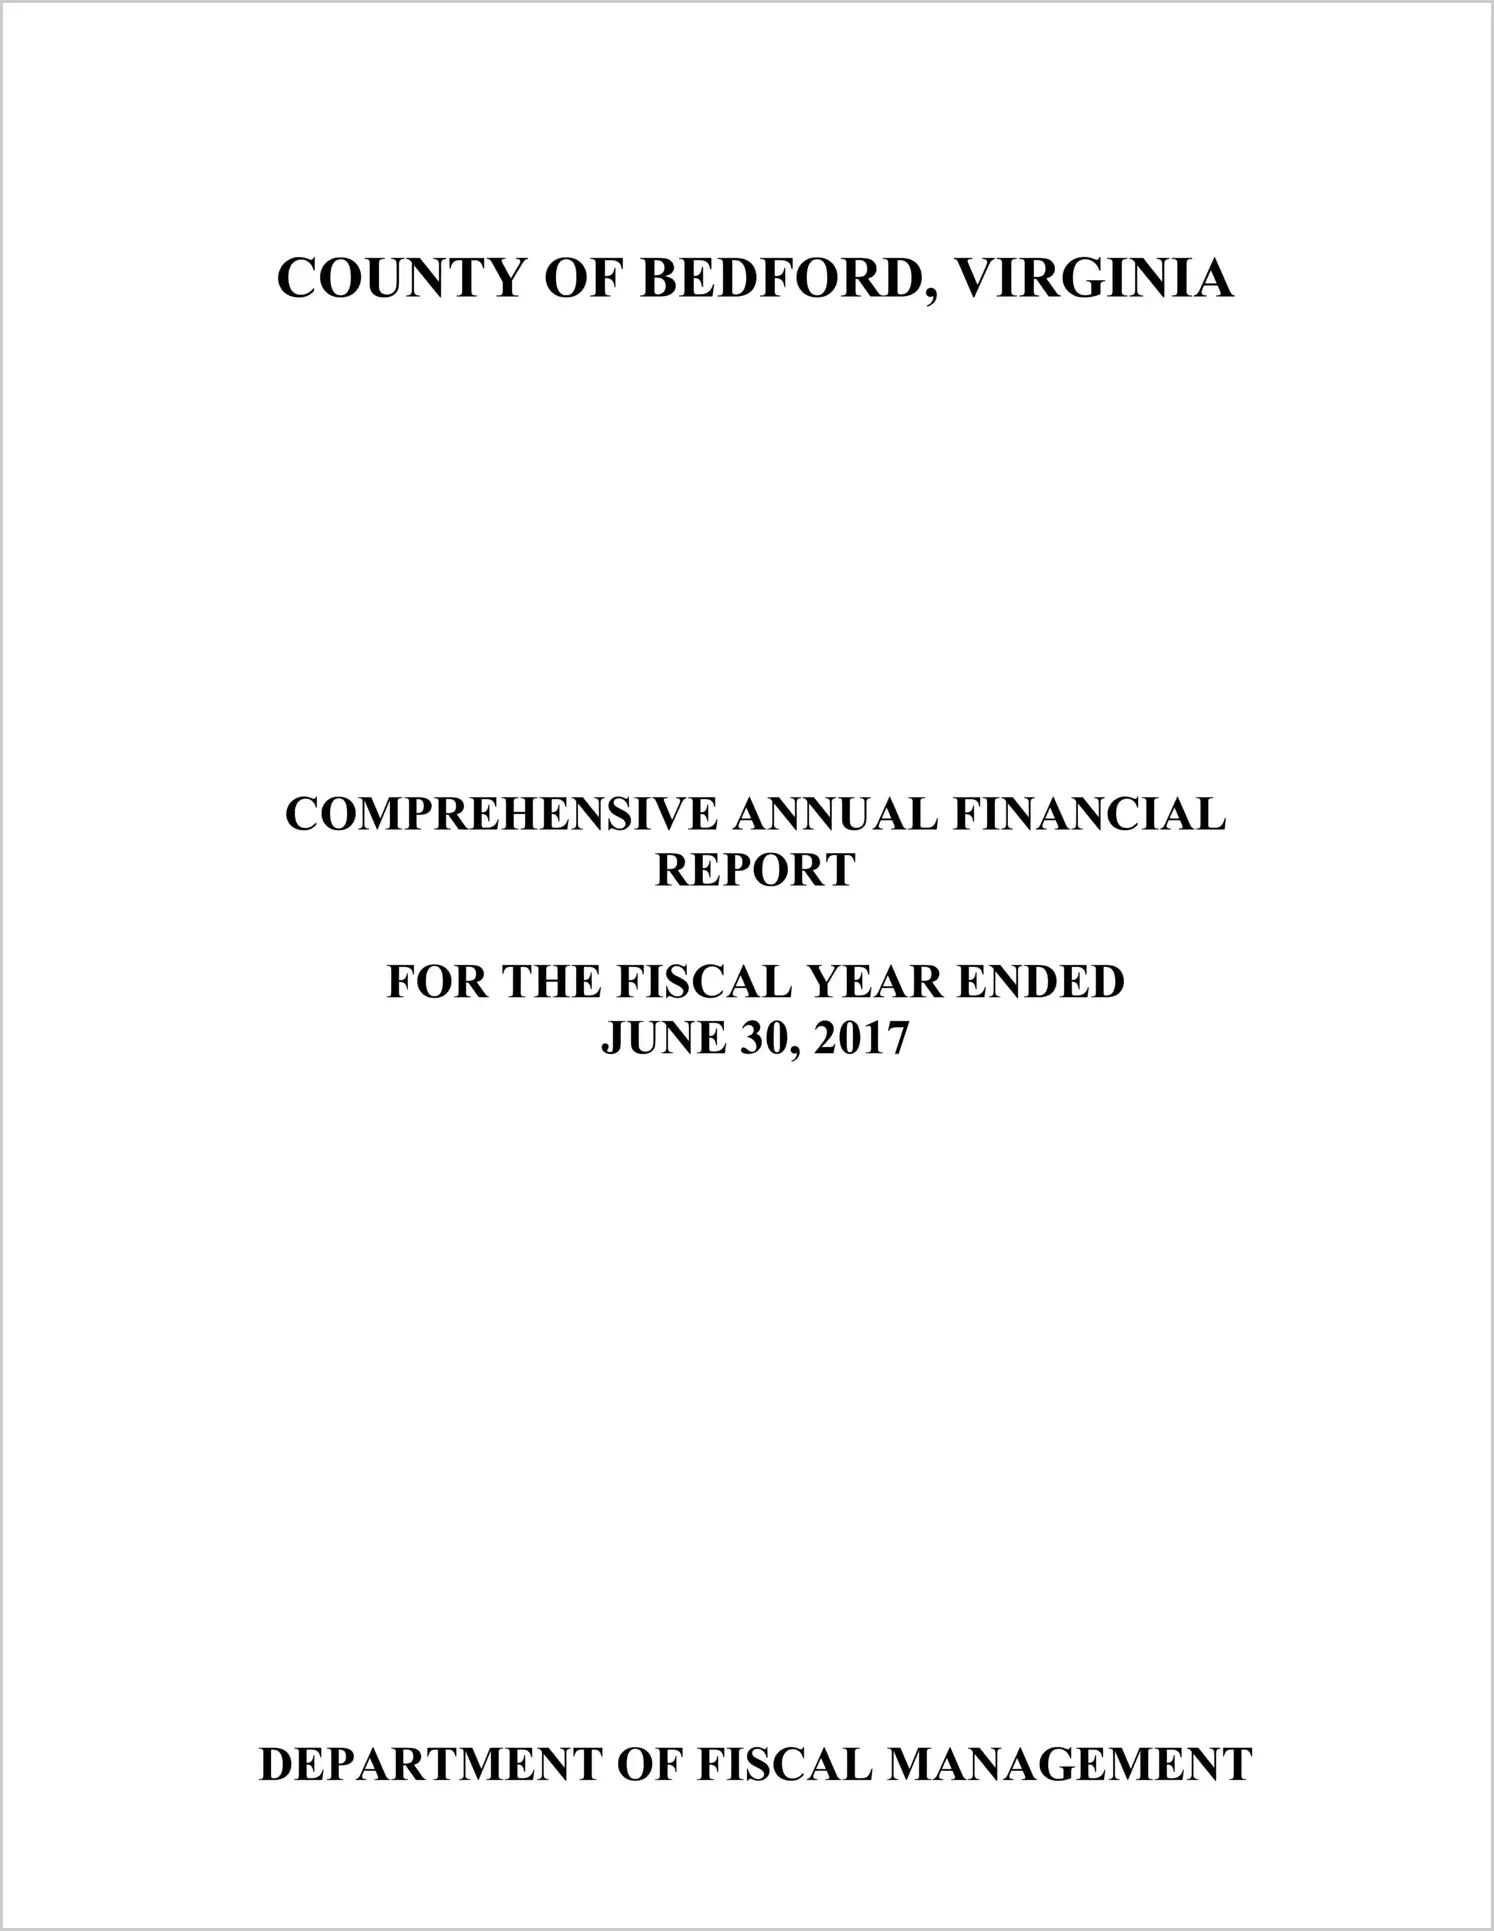 2017 Annual Financial Report for County of Bedford